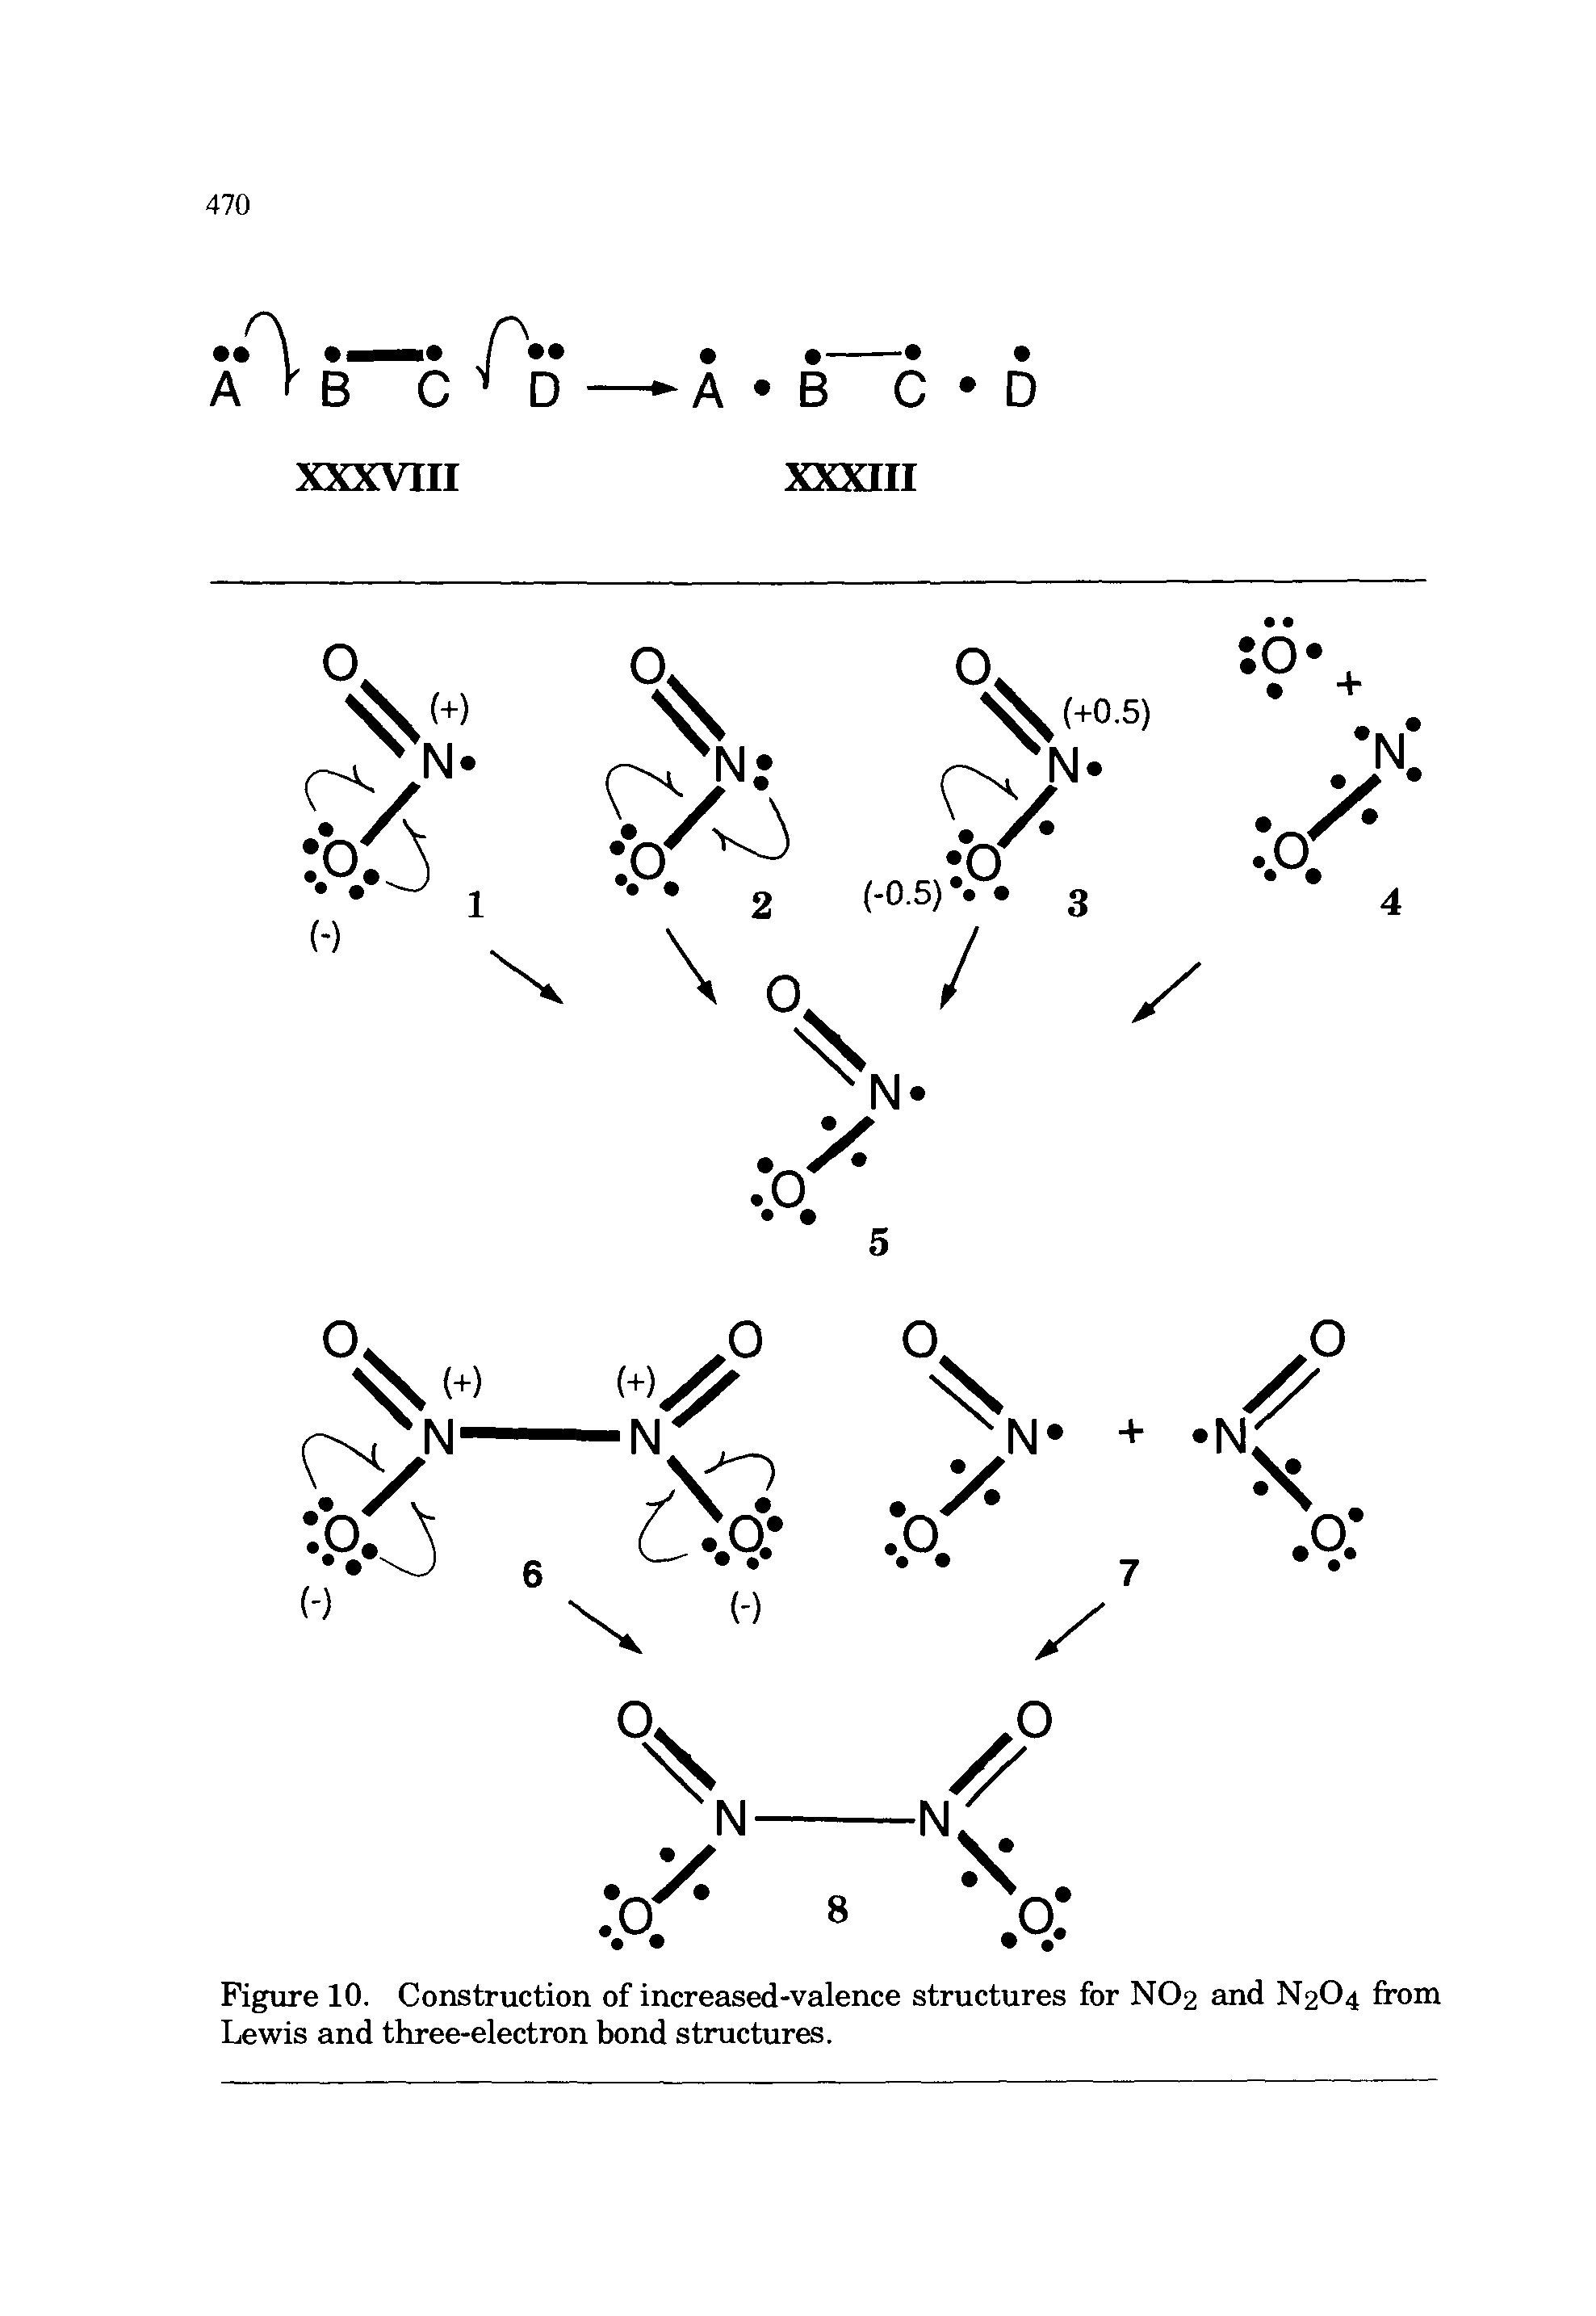 Figure 10. Construction of increased-valence structures for NO2 and N2O4 from Lewis and three-electron bond structures.